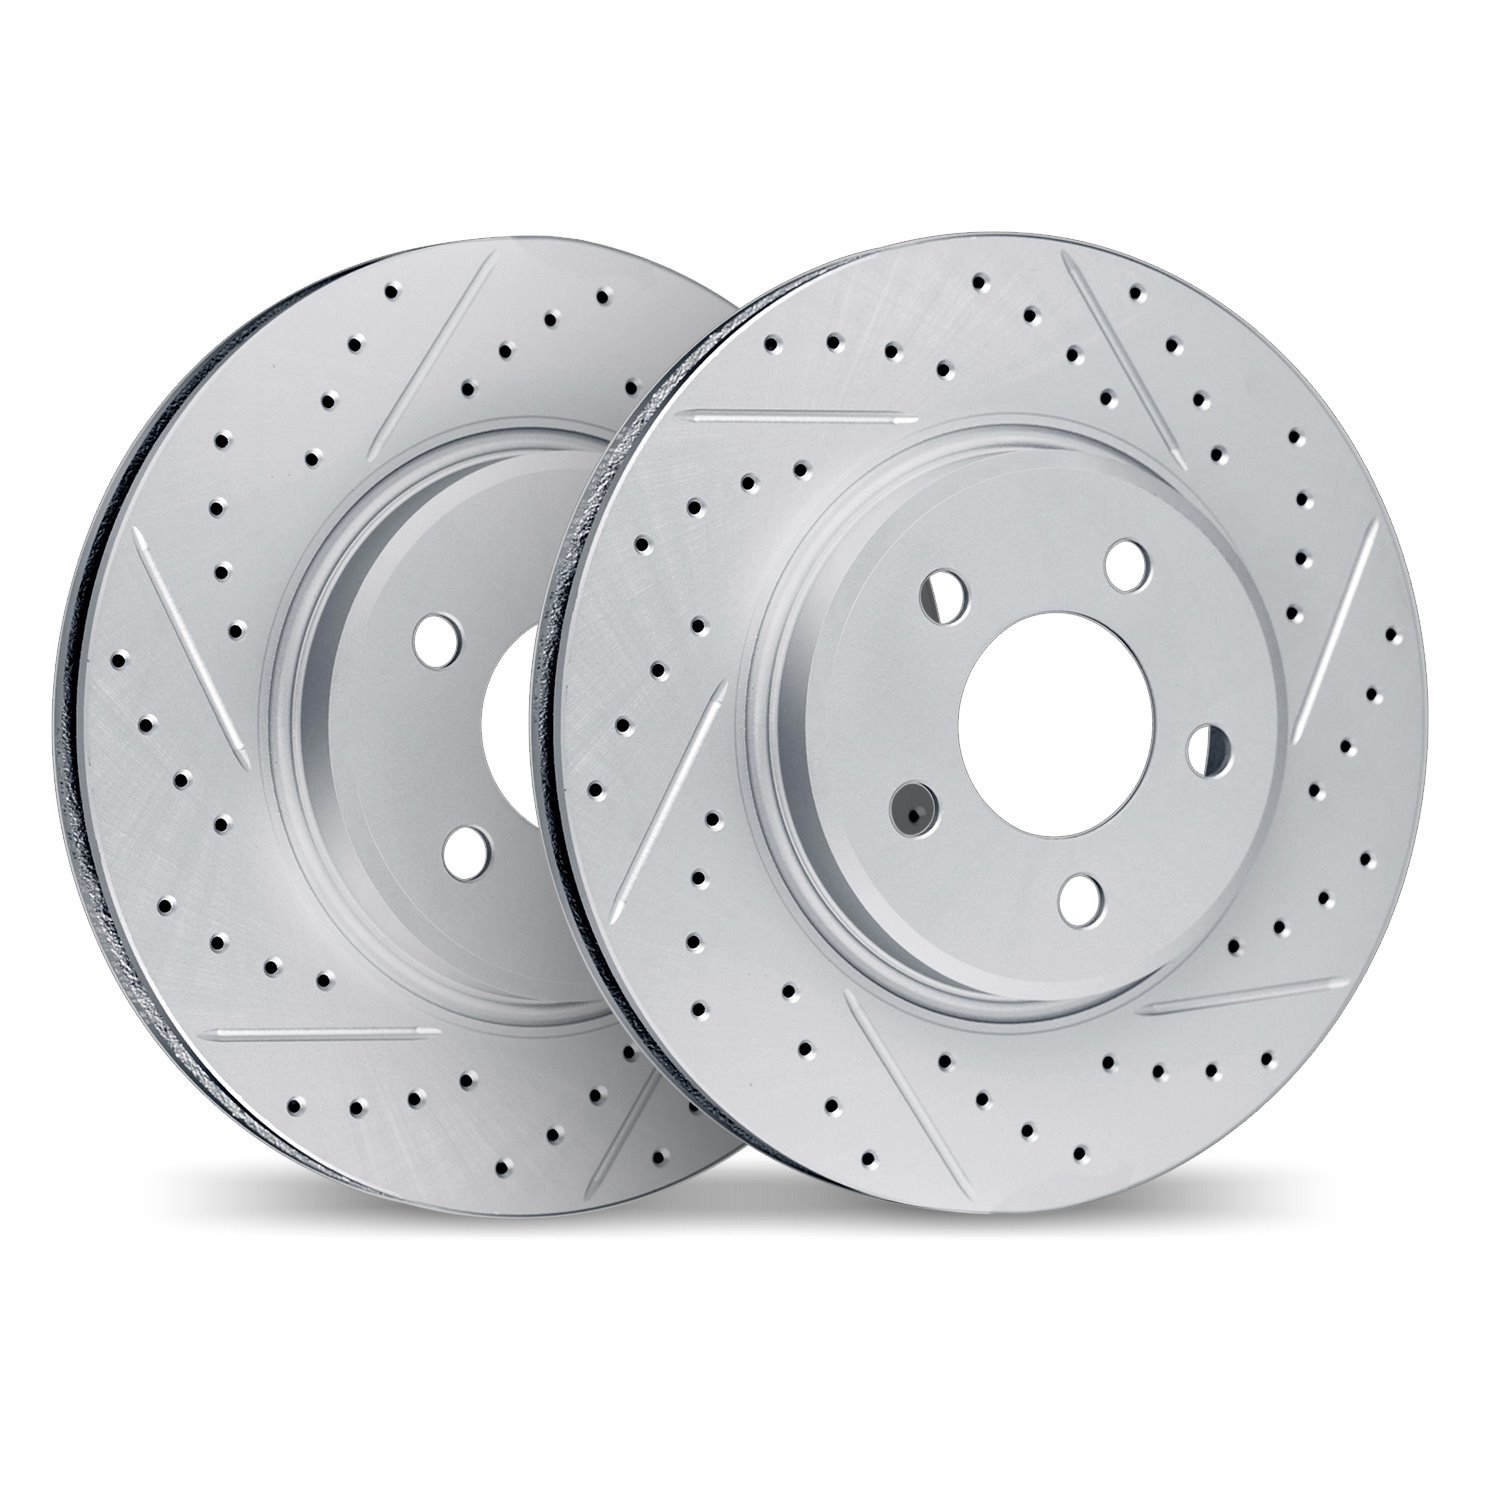 2002-47025 Geoperformance Drilled/Slotted Brake Rotors, 2004-2008 GM, Position: Front